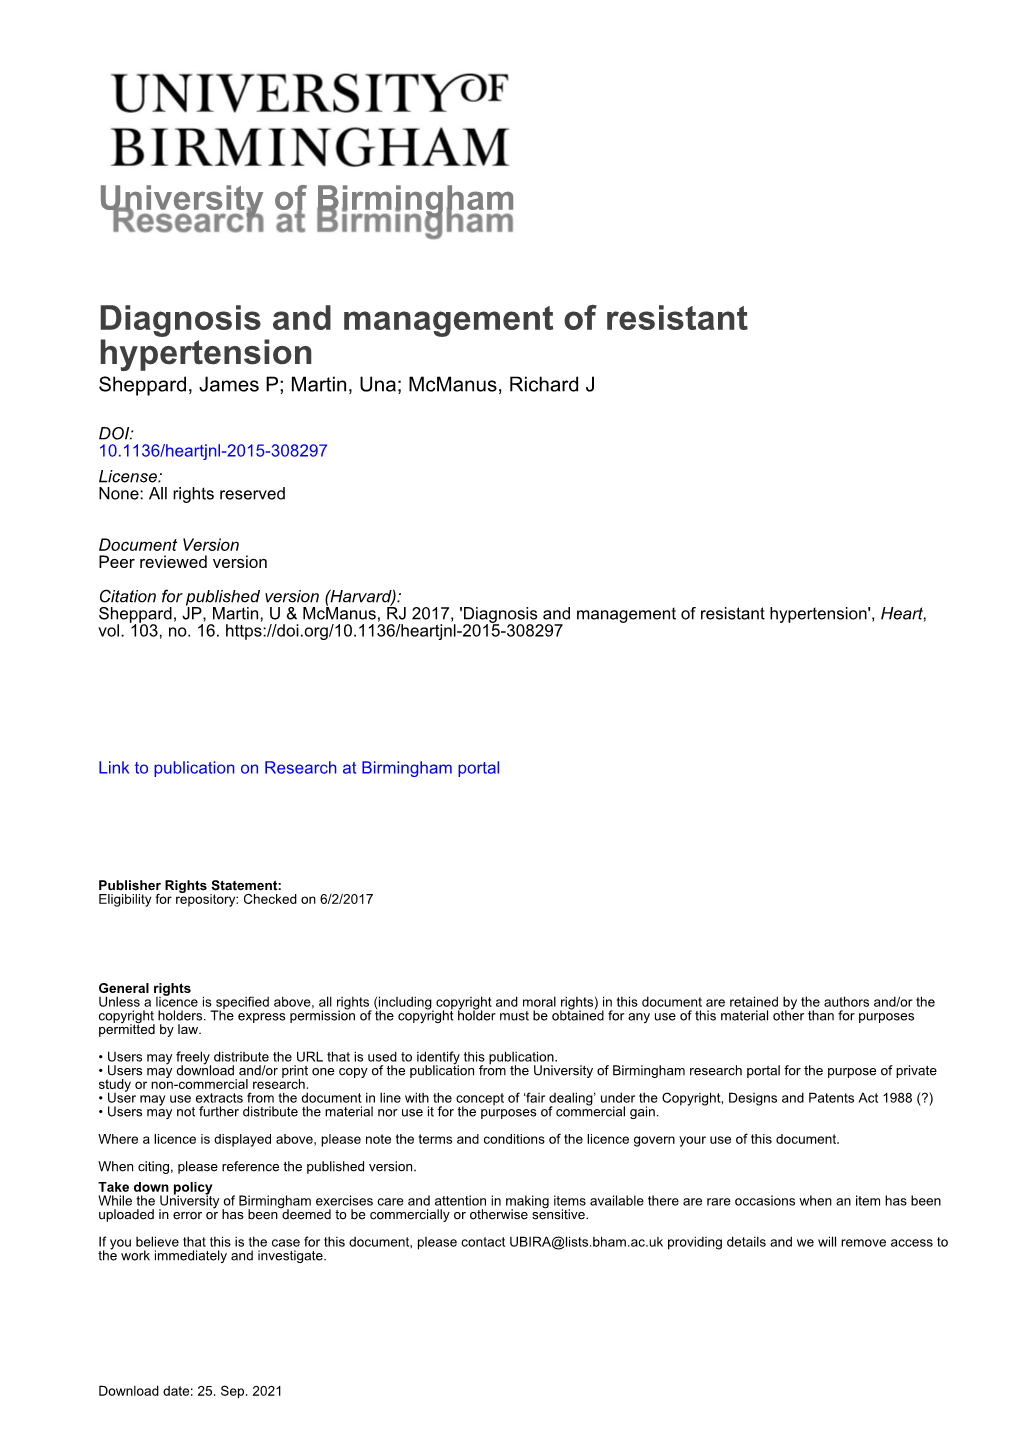 University of Birmingham Diagnosis and Management of Resistant